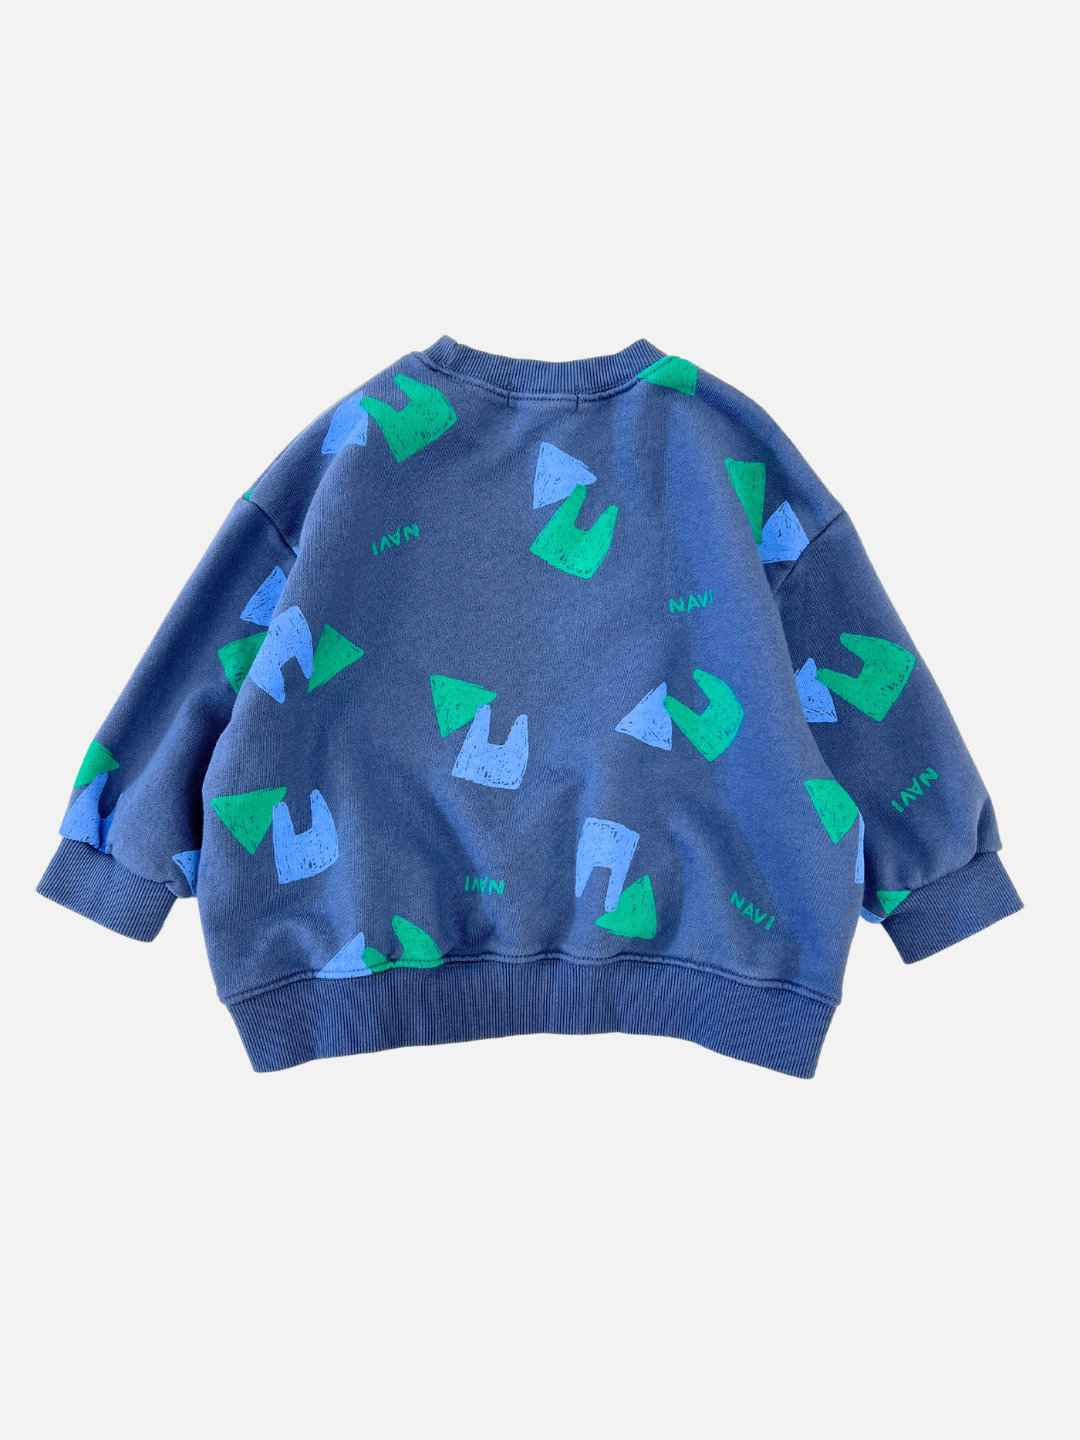 Back view of kids blue crewneck sweatshirt with an all over pattern of green and blue shapes and the brand name Navi.